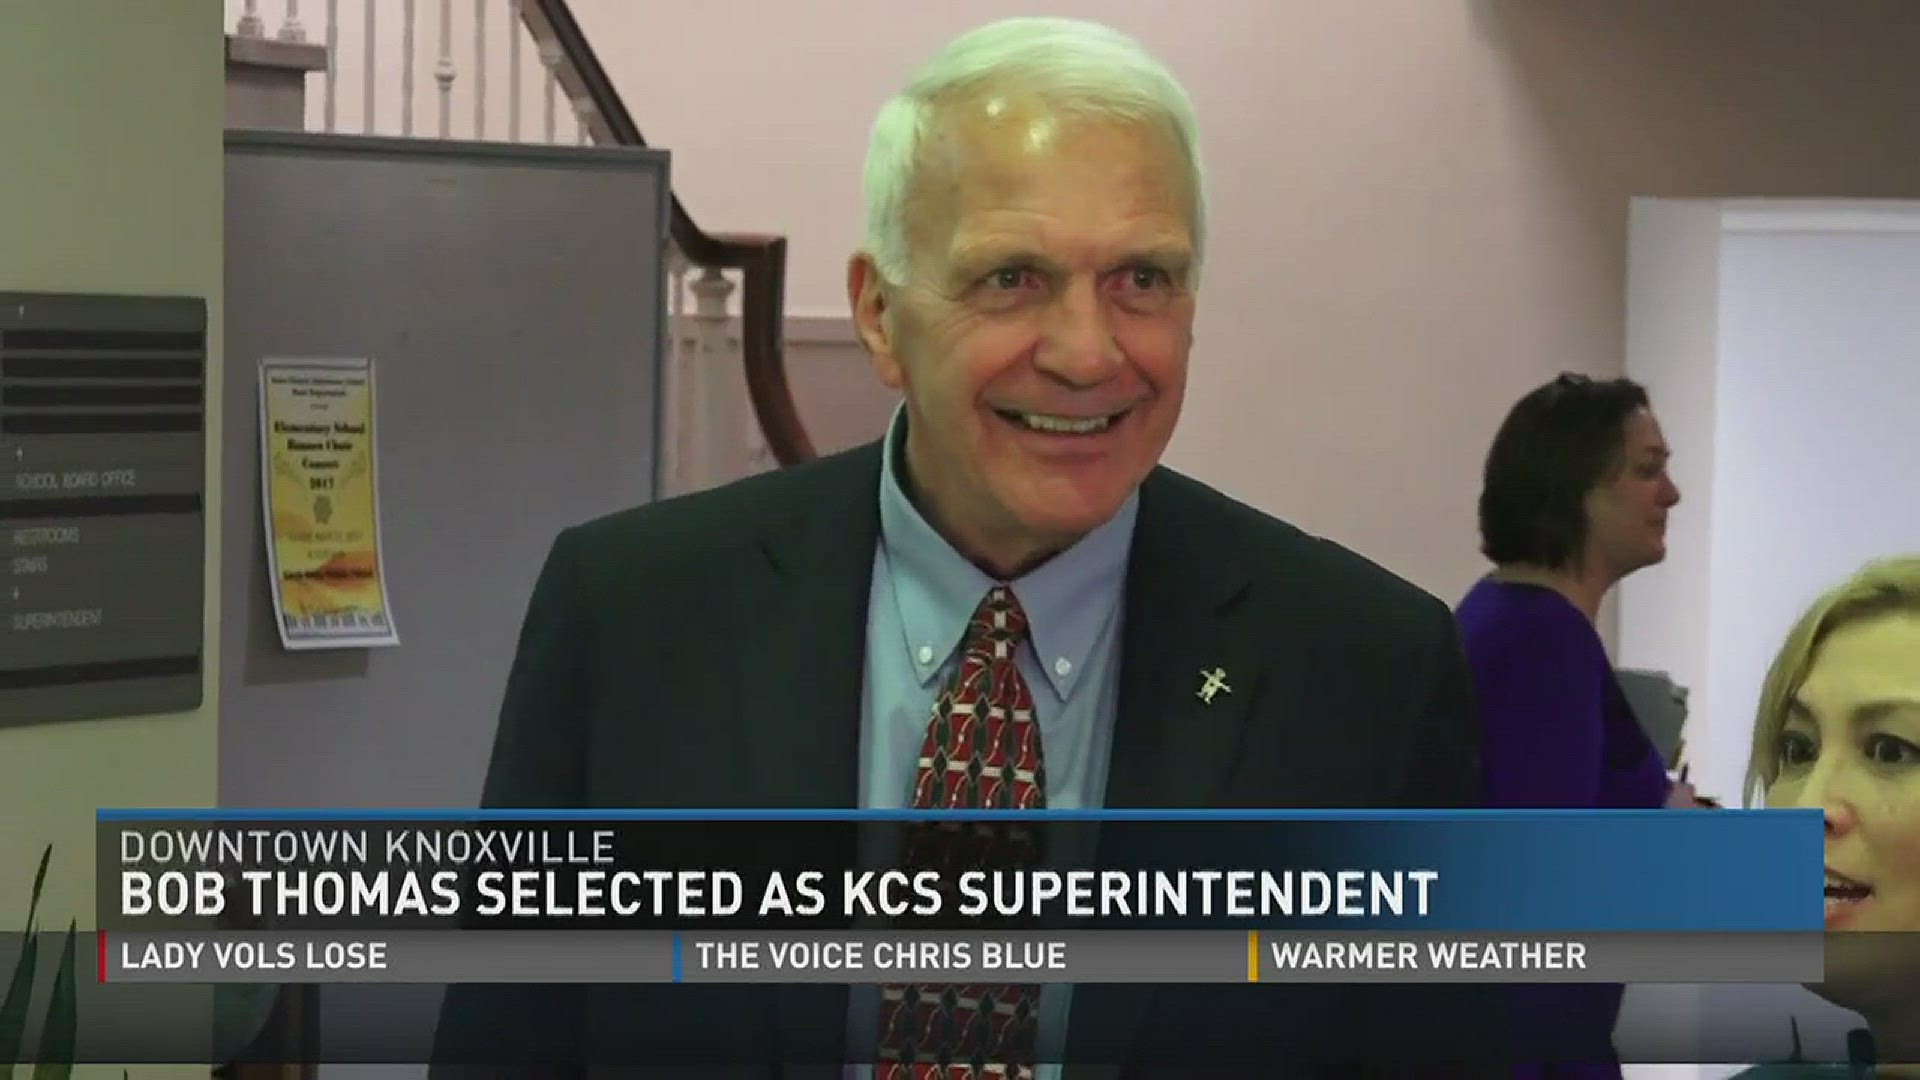 March 20, 2017: In a unanimous vote among its nine members, the Knox County Board of Education selected Bob Thomas as the new leader of Knox County Schools.